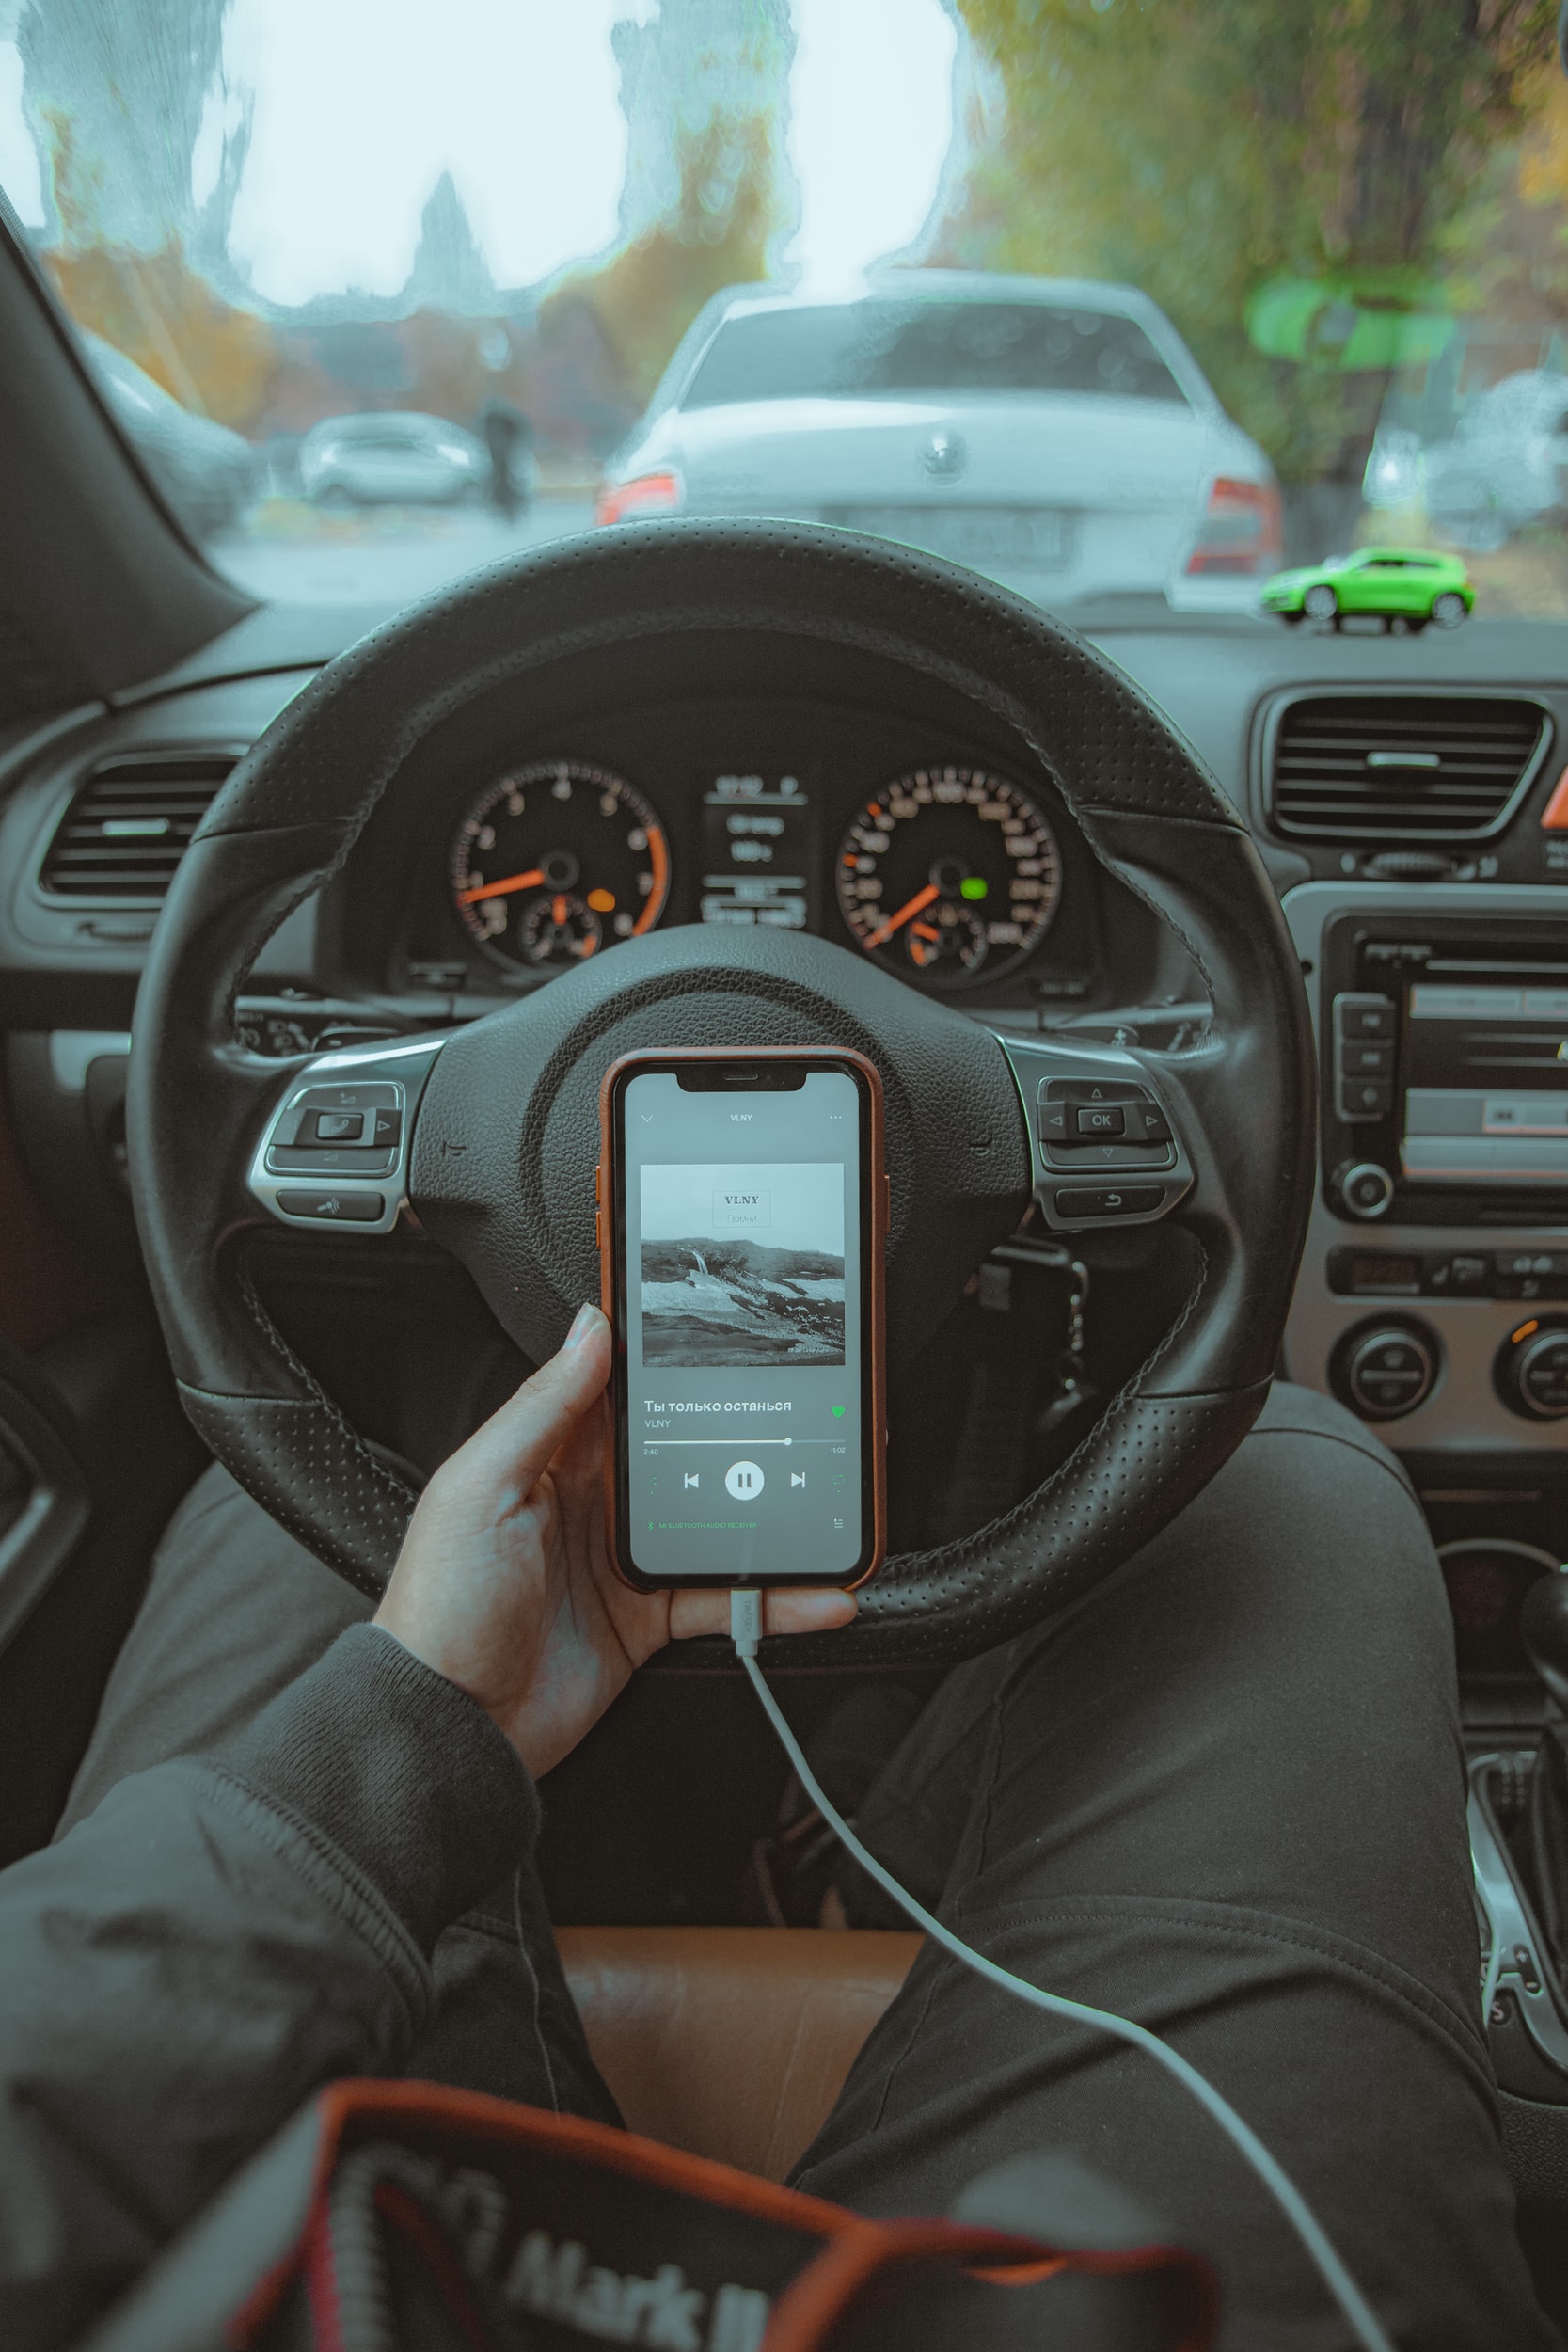 The distracted driving crisis